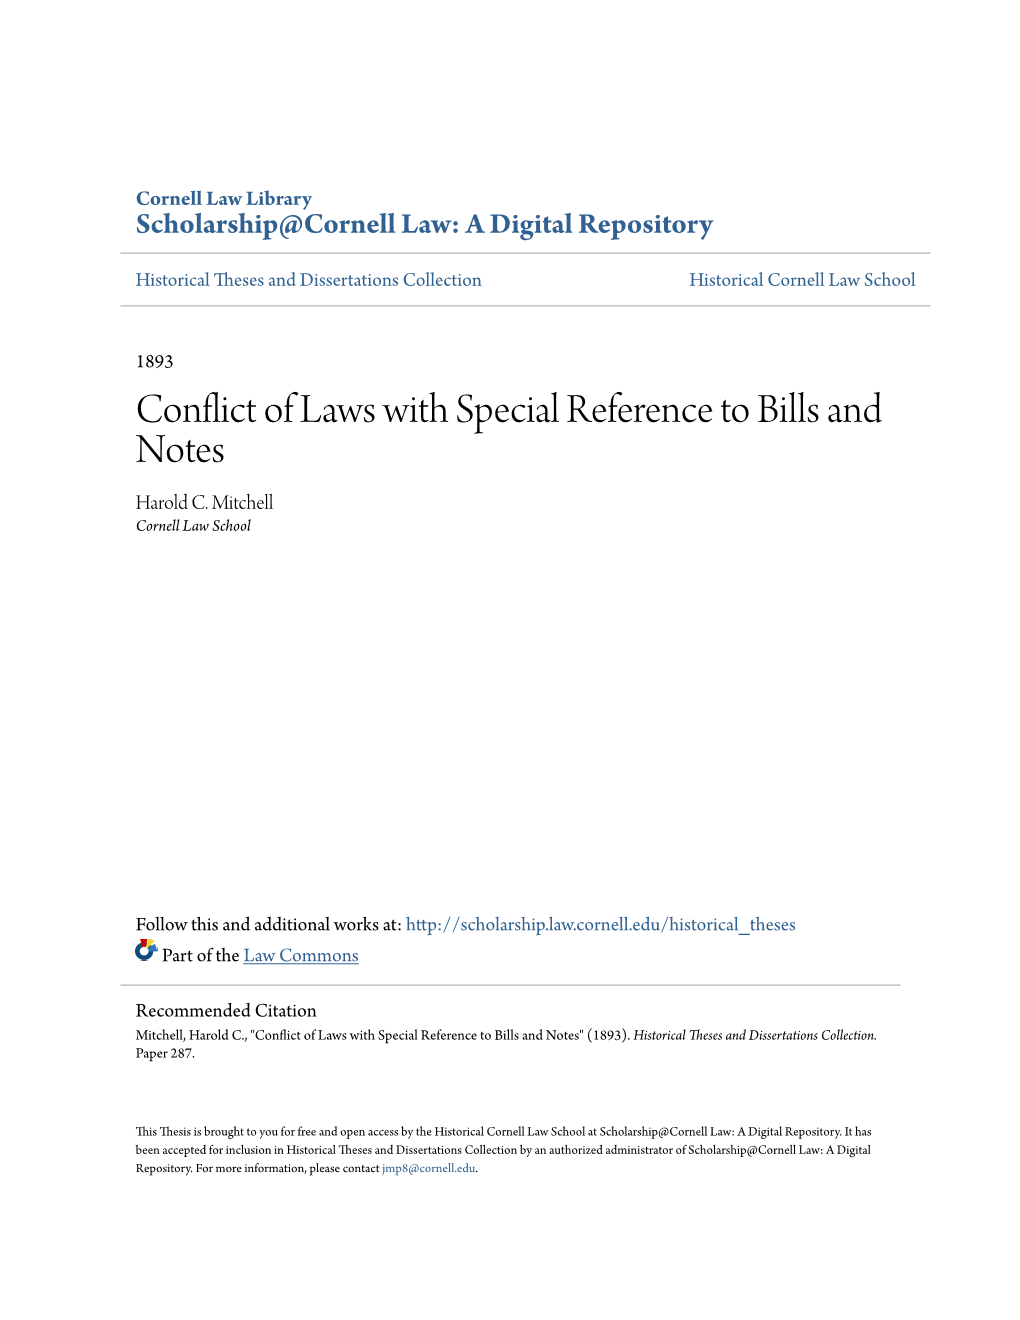 Conflict of Laws with Special Reference to Bills and Notes Harold C